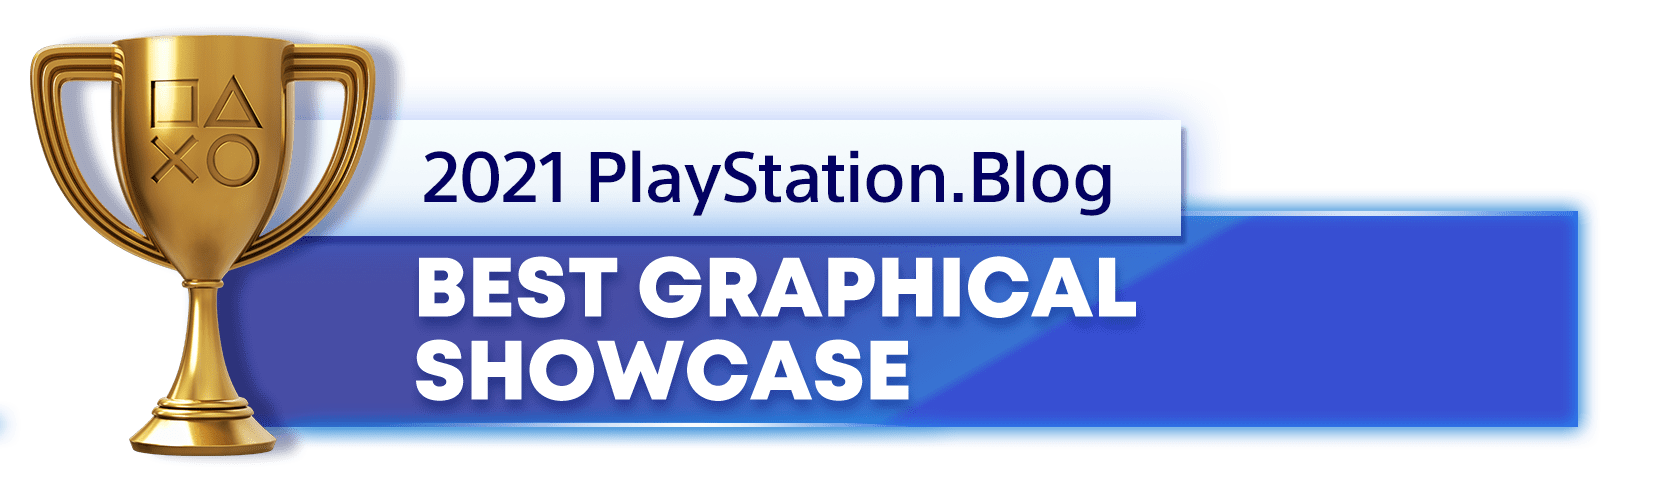 PlayStation Showcase 2021: Where and When to Watch